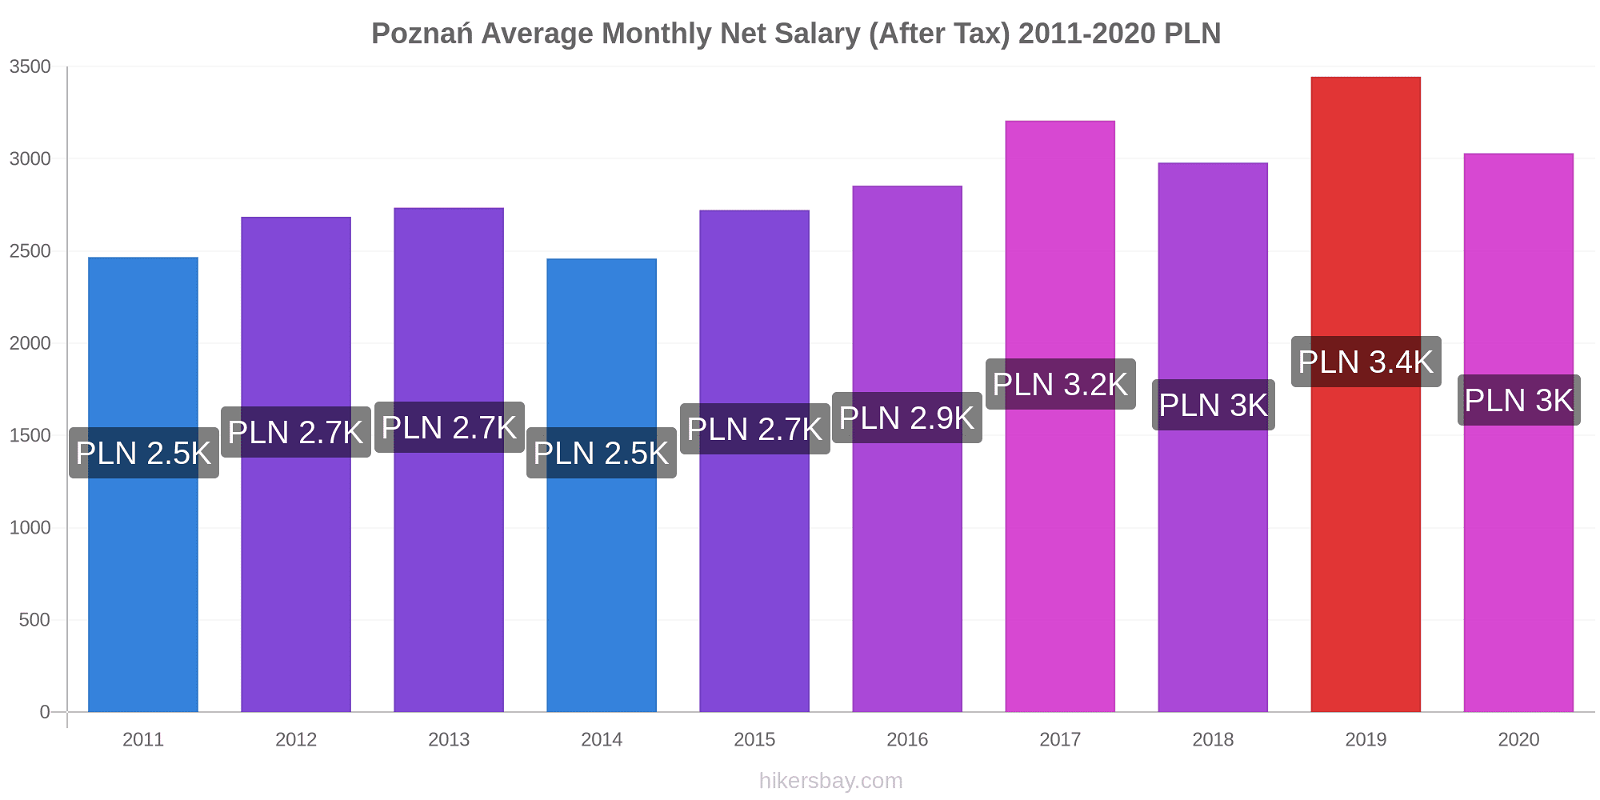 Poznań price changes Average Monthly Net Salary (After Tax) hikersbay.com